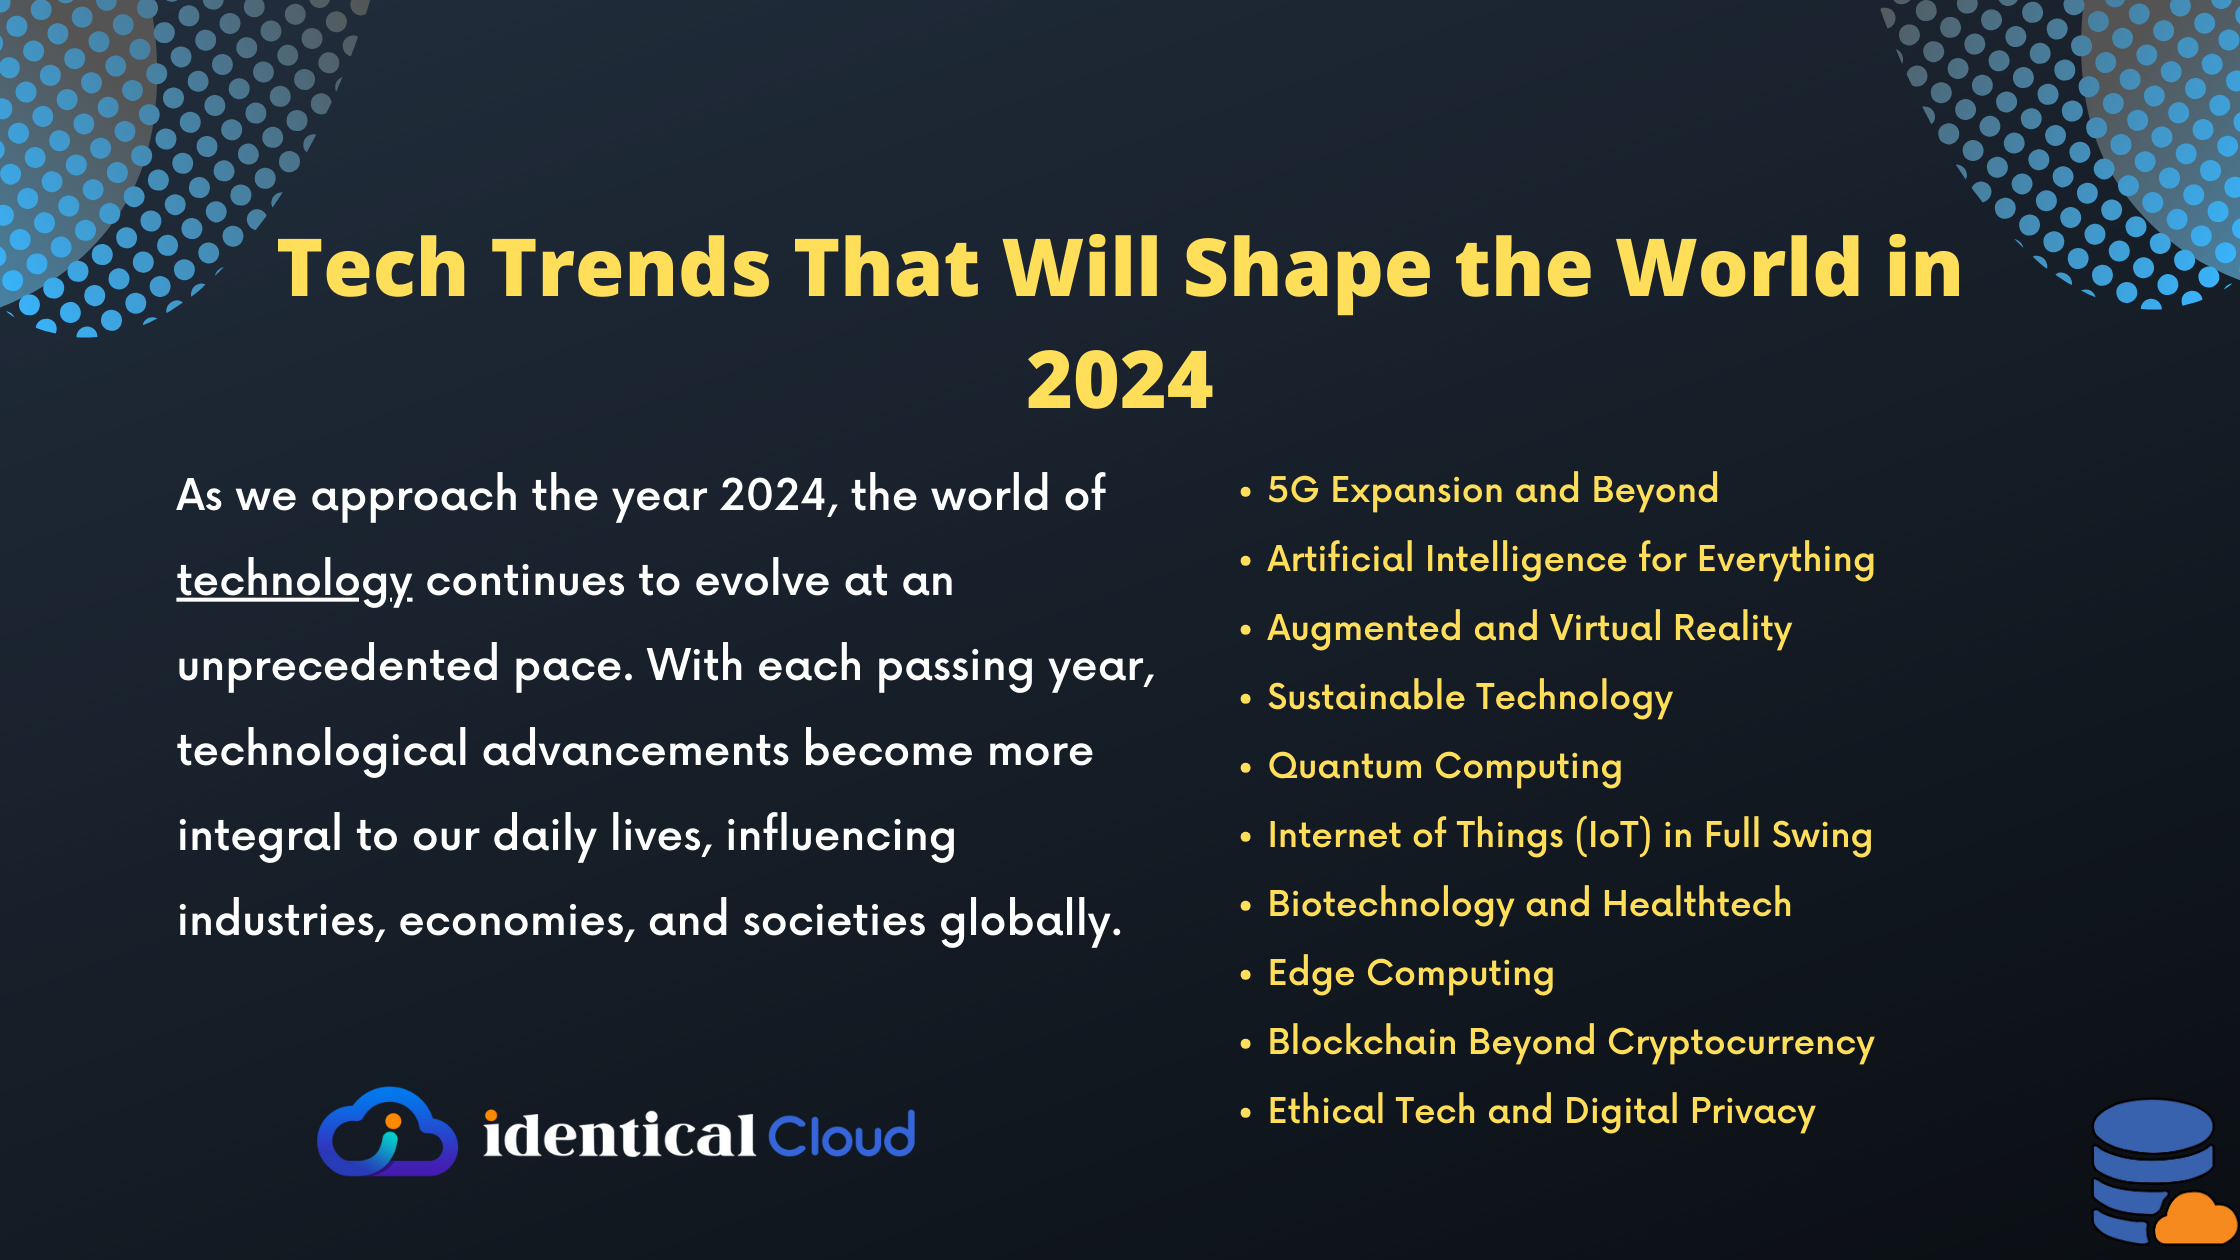 Tech Trends That Will Shape the World in 2024 - identicalcloud.com